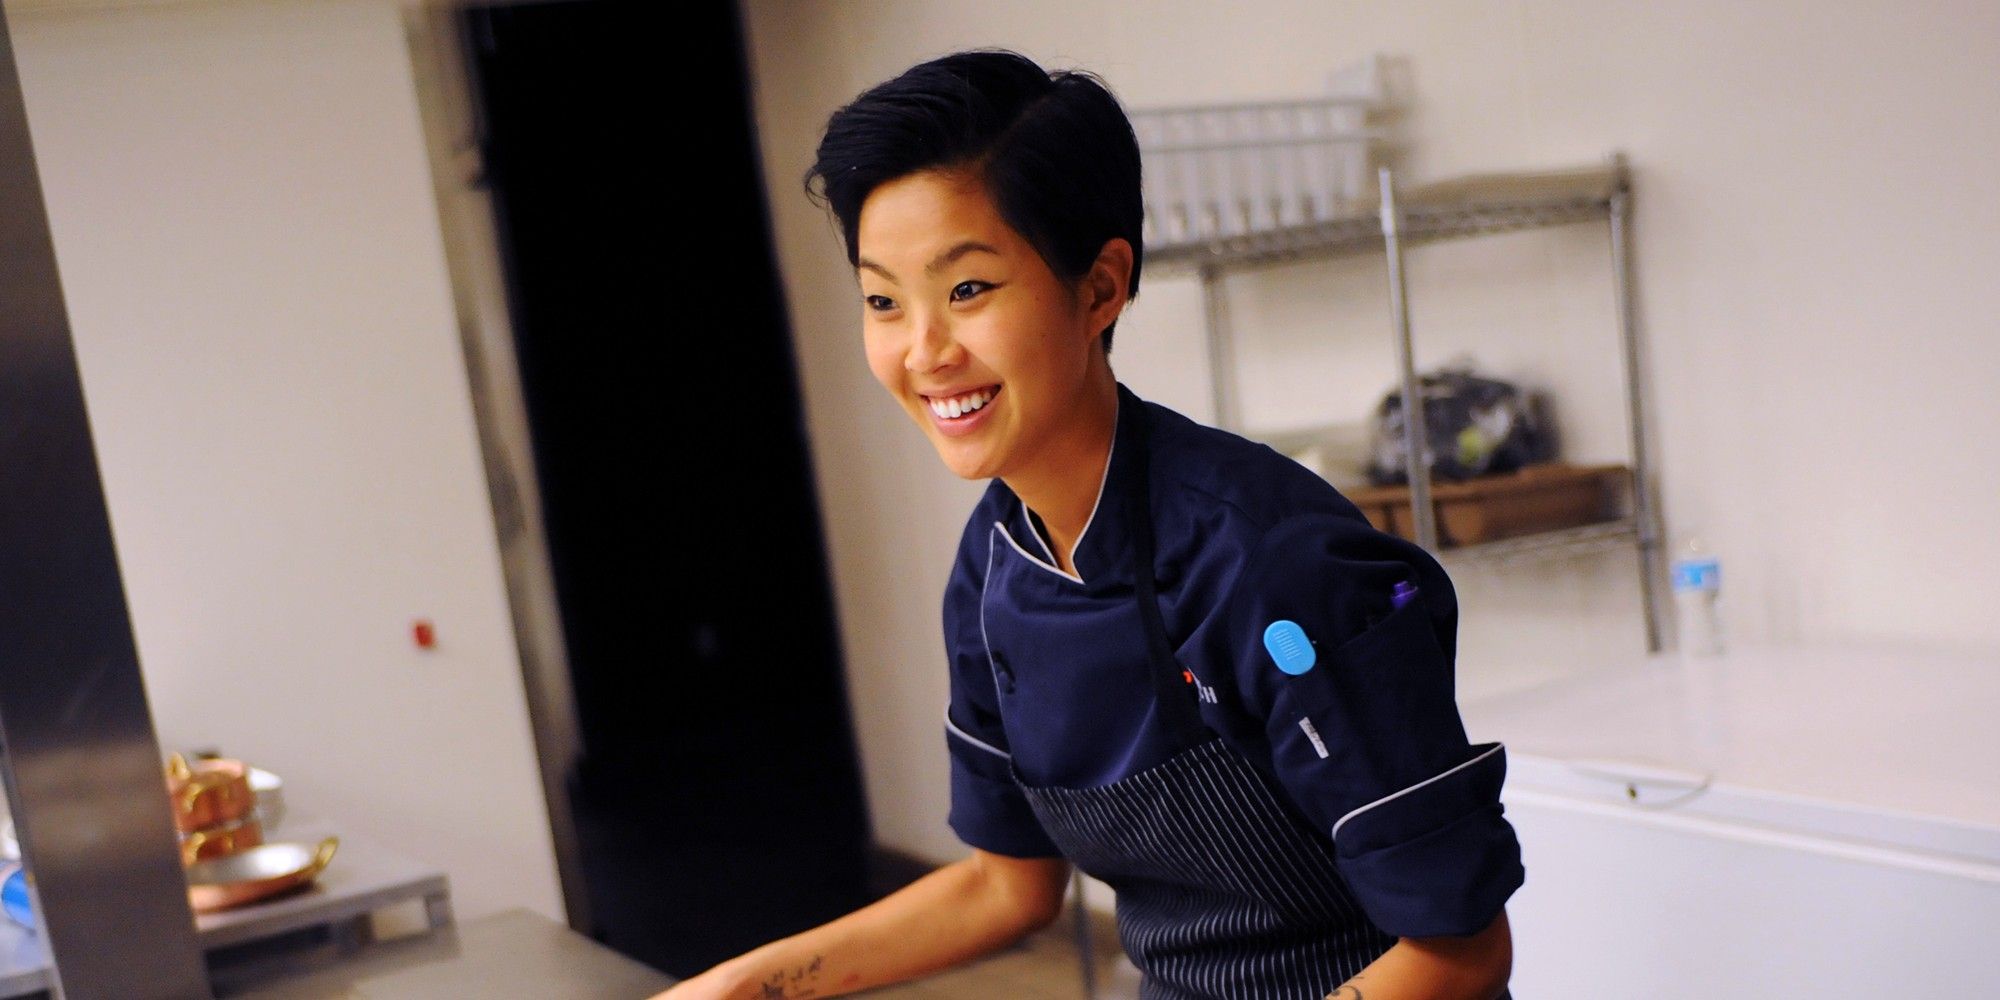 Top Chef Contestants With The Most Successful Careers Post-Show